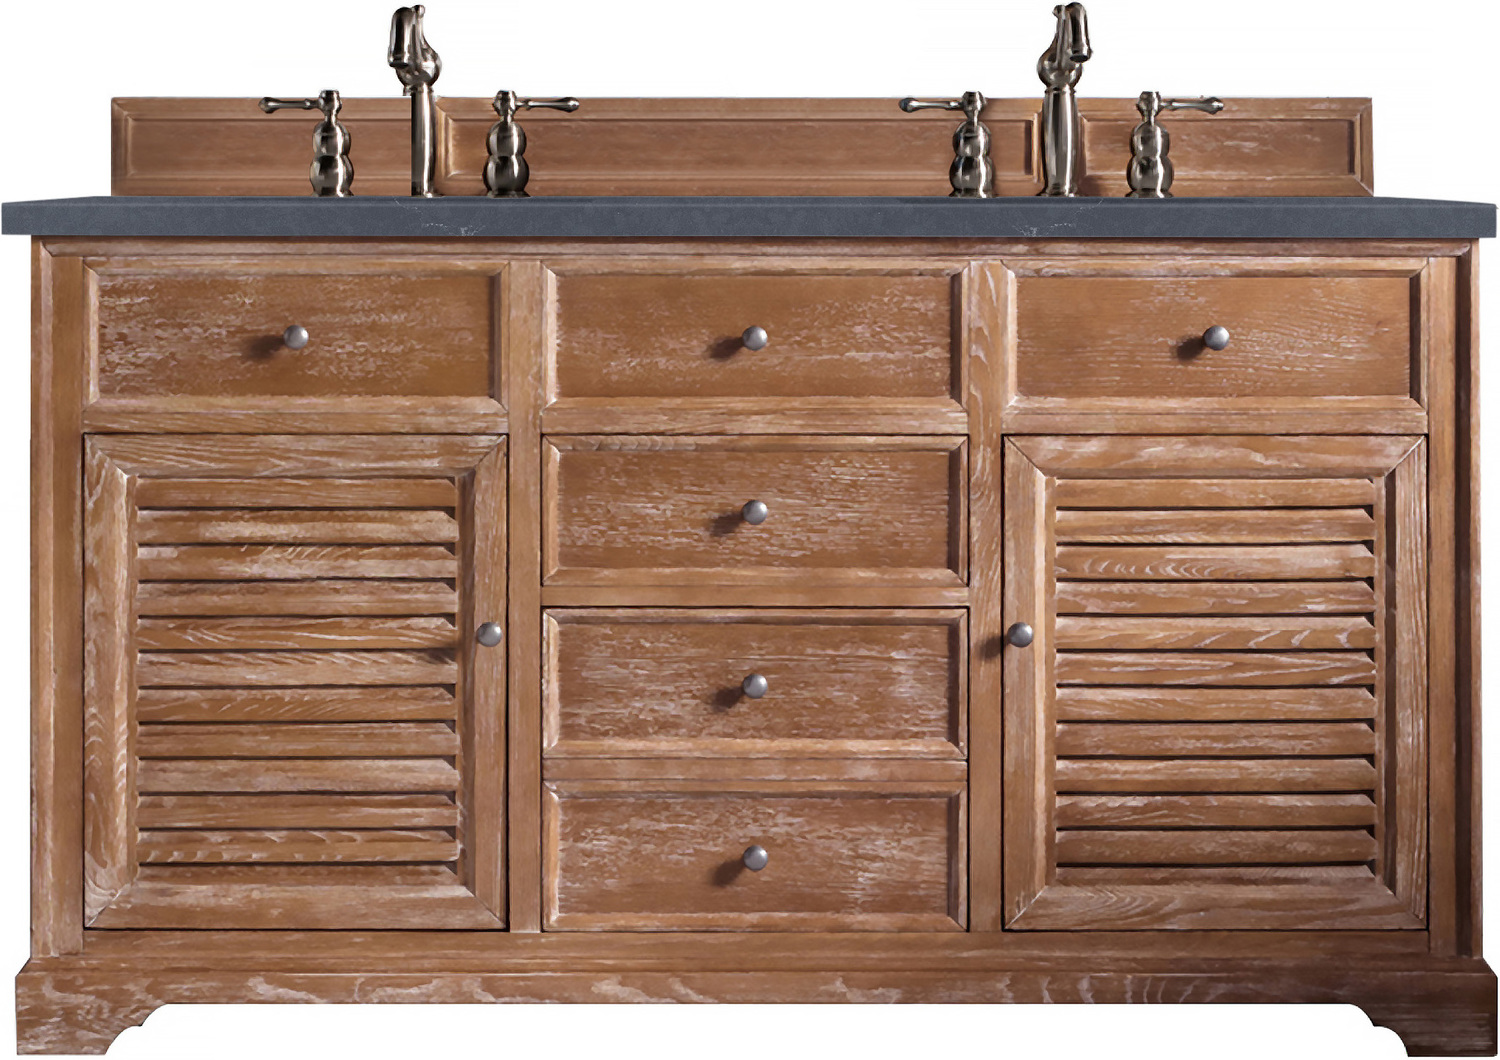 70 inch vanity top double sink James Martin Vanity Driftwood Transitional